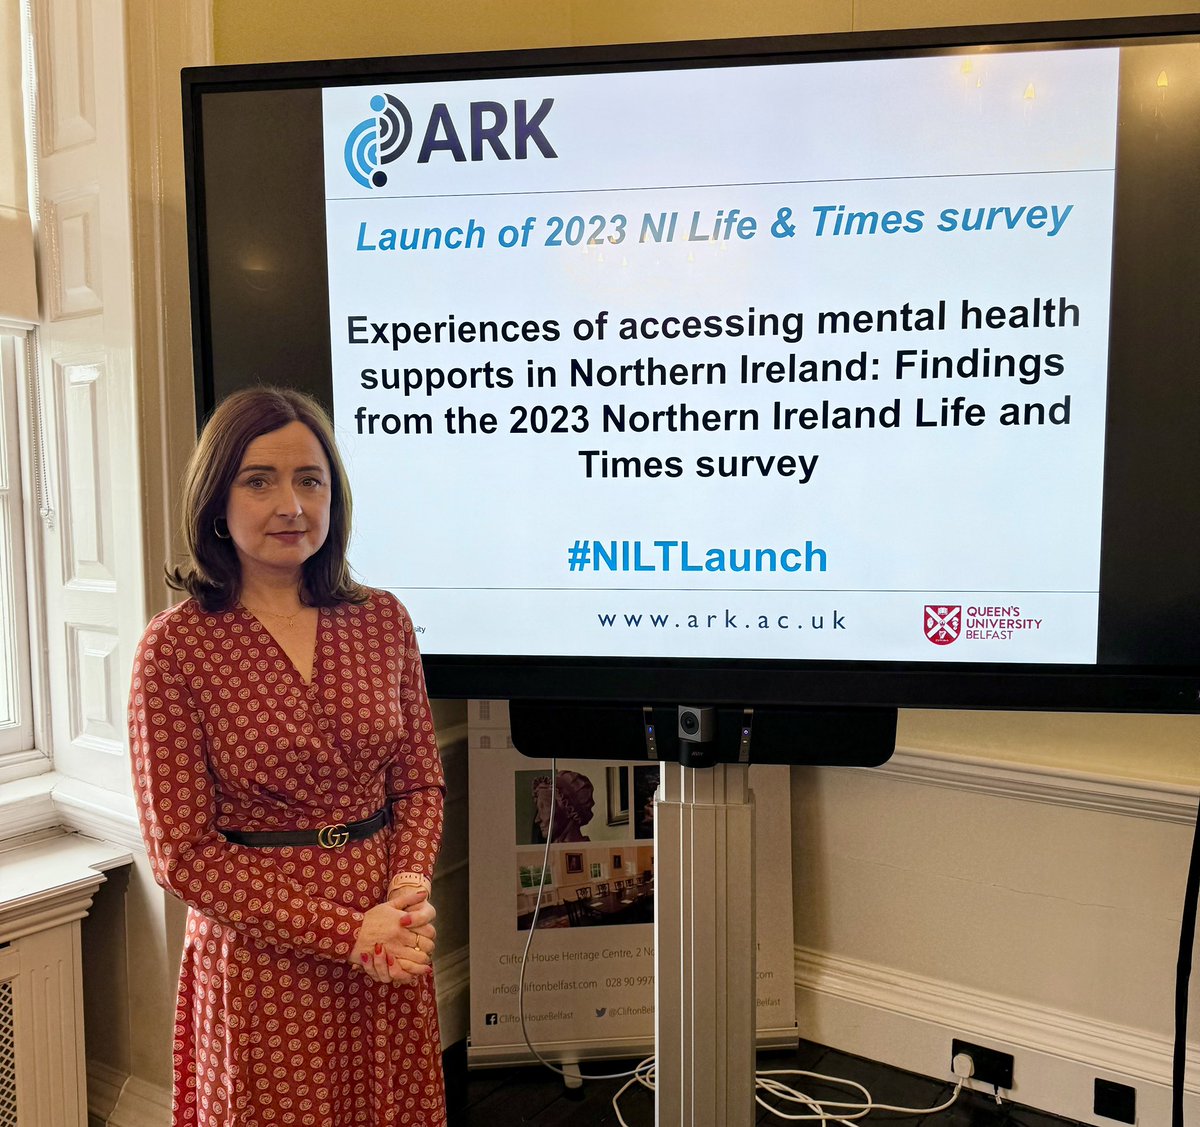 Looking forward to the launch of the 2023 NI Life and Times results with MHC @profsiobhanon @NicoleBond02 Today exploring the public experiences of accessing MH services in NI Access results: ark.ac.uk/nilt/2023/ @ARK_info @QUBSSESW @ASPS_UU #MentalHealthAwarenessWeek